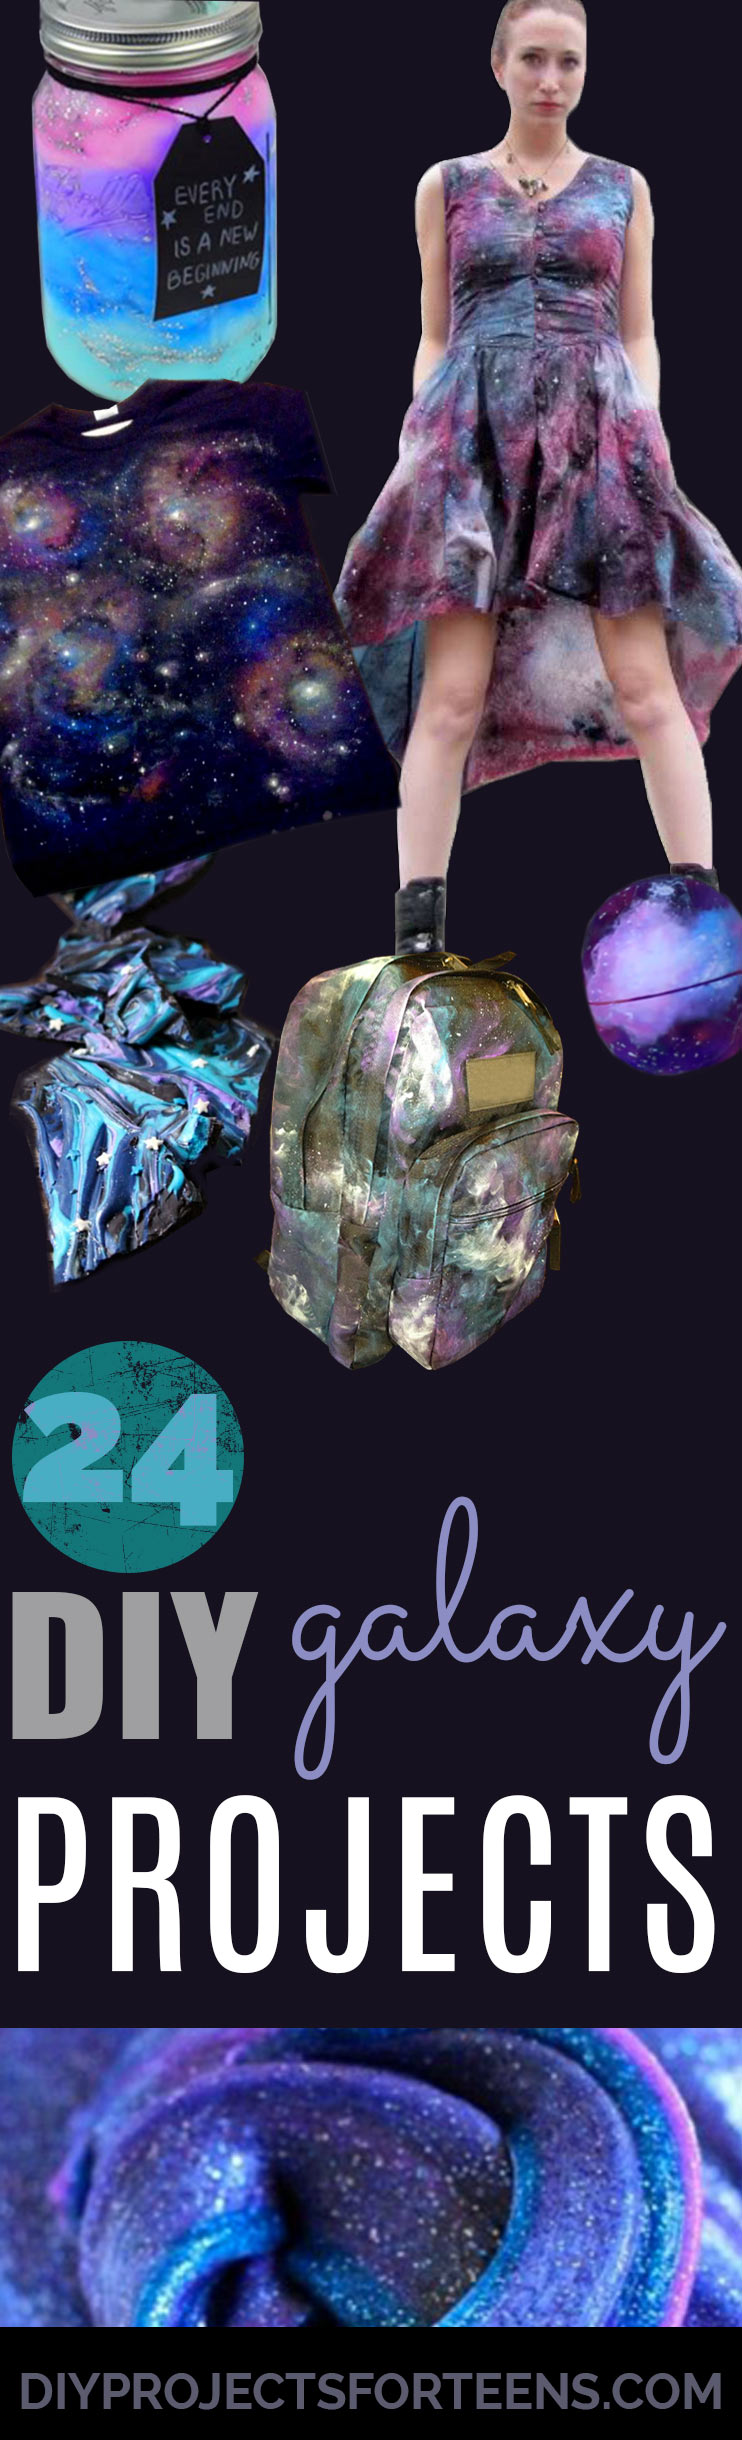 DIY Galaxy Crafts - Galaxy DIY Projects for Your Room, Gifts, Clothes. Ideas for Painting Jewelry, Shirts, Jar Ideas, Food and Makeup. Step by Step Tutorials for Teens, Tweens and Adults